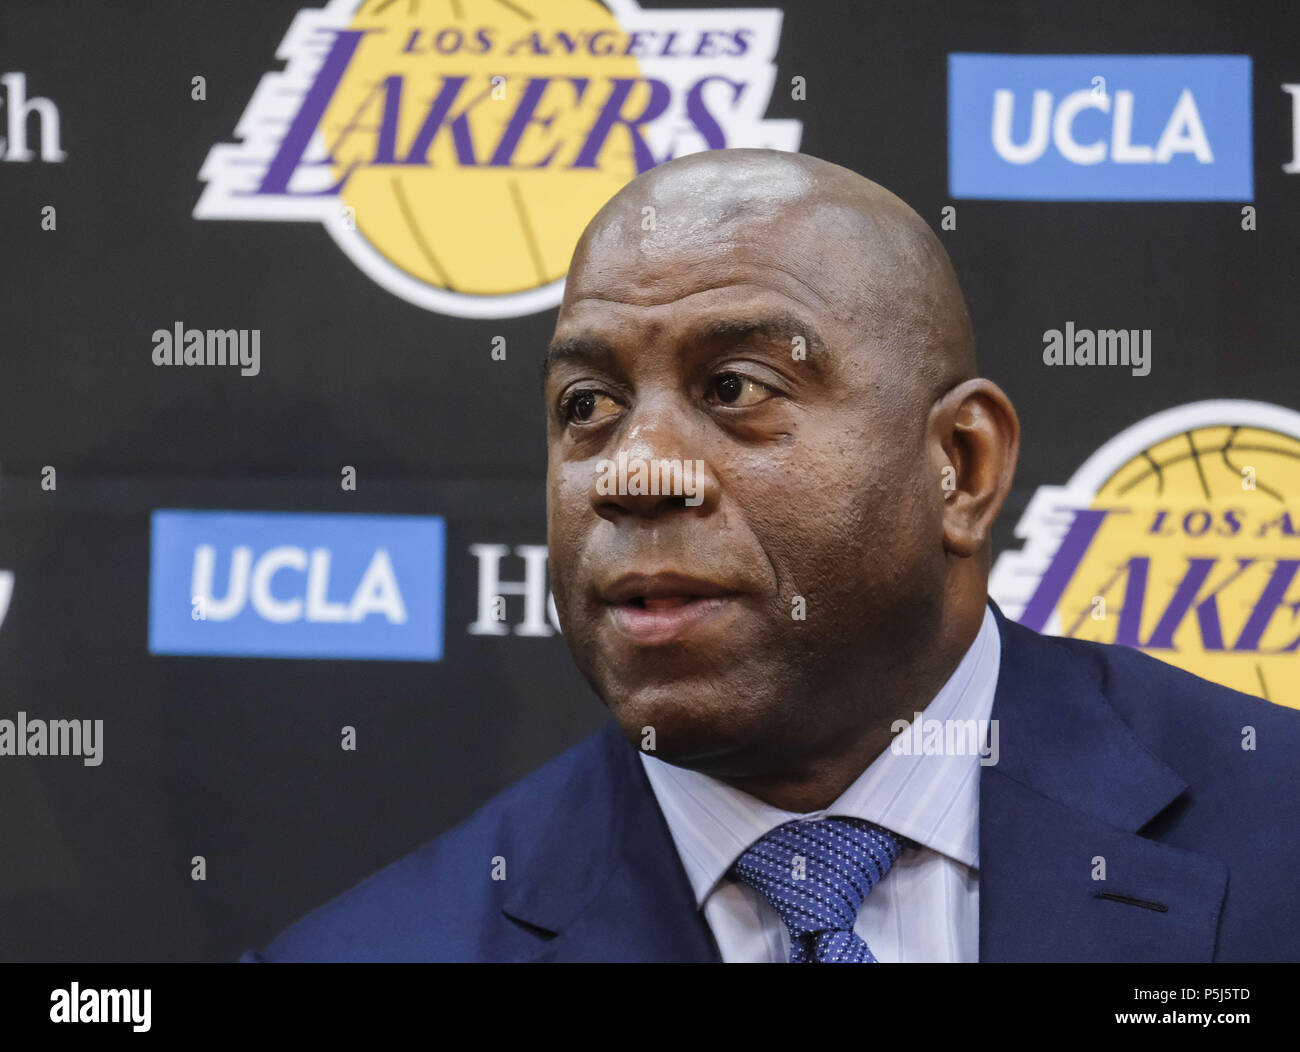 Los Angeles, California, USA. 26th June, 2018. Los Angeles Lakers president of basketball operations, Earvin ''Magic'' Johnson at an introductory press conference in Los Angeles, Tuesday, June 26, 2018. The Lakers introduce two new draft players, Moritz Wagner, originally from Germany, the 25th pick in the 2018 NBA Draft and guard Sviatoslav Mykhailiuk, originally from Ukraine. Credit: Ringo Chiu/ZUMA Wire/Alamy Live News Stock Photo